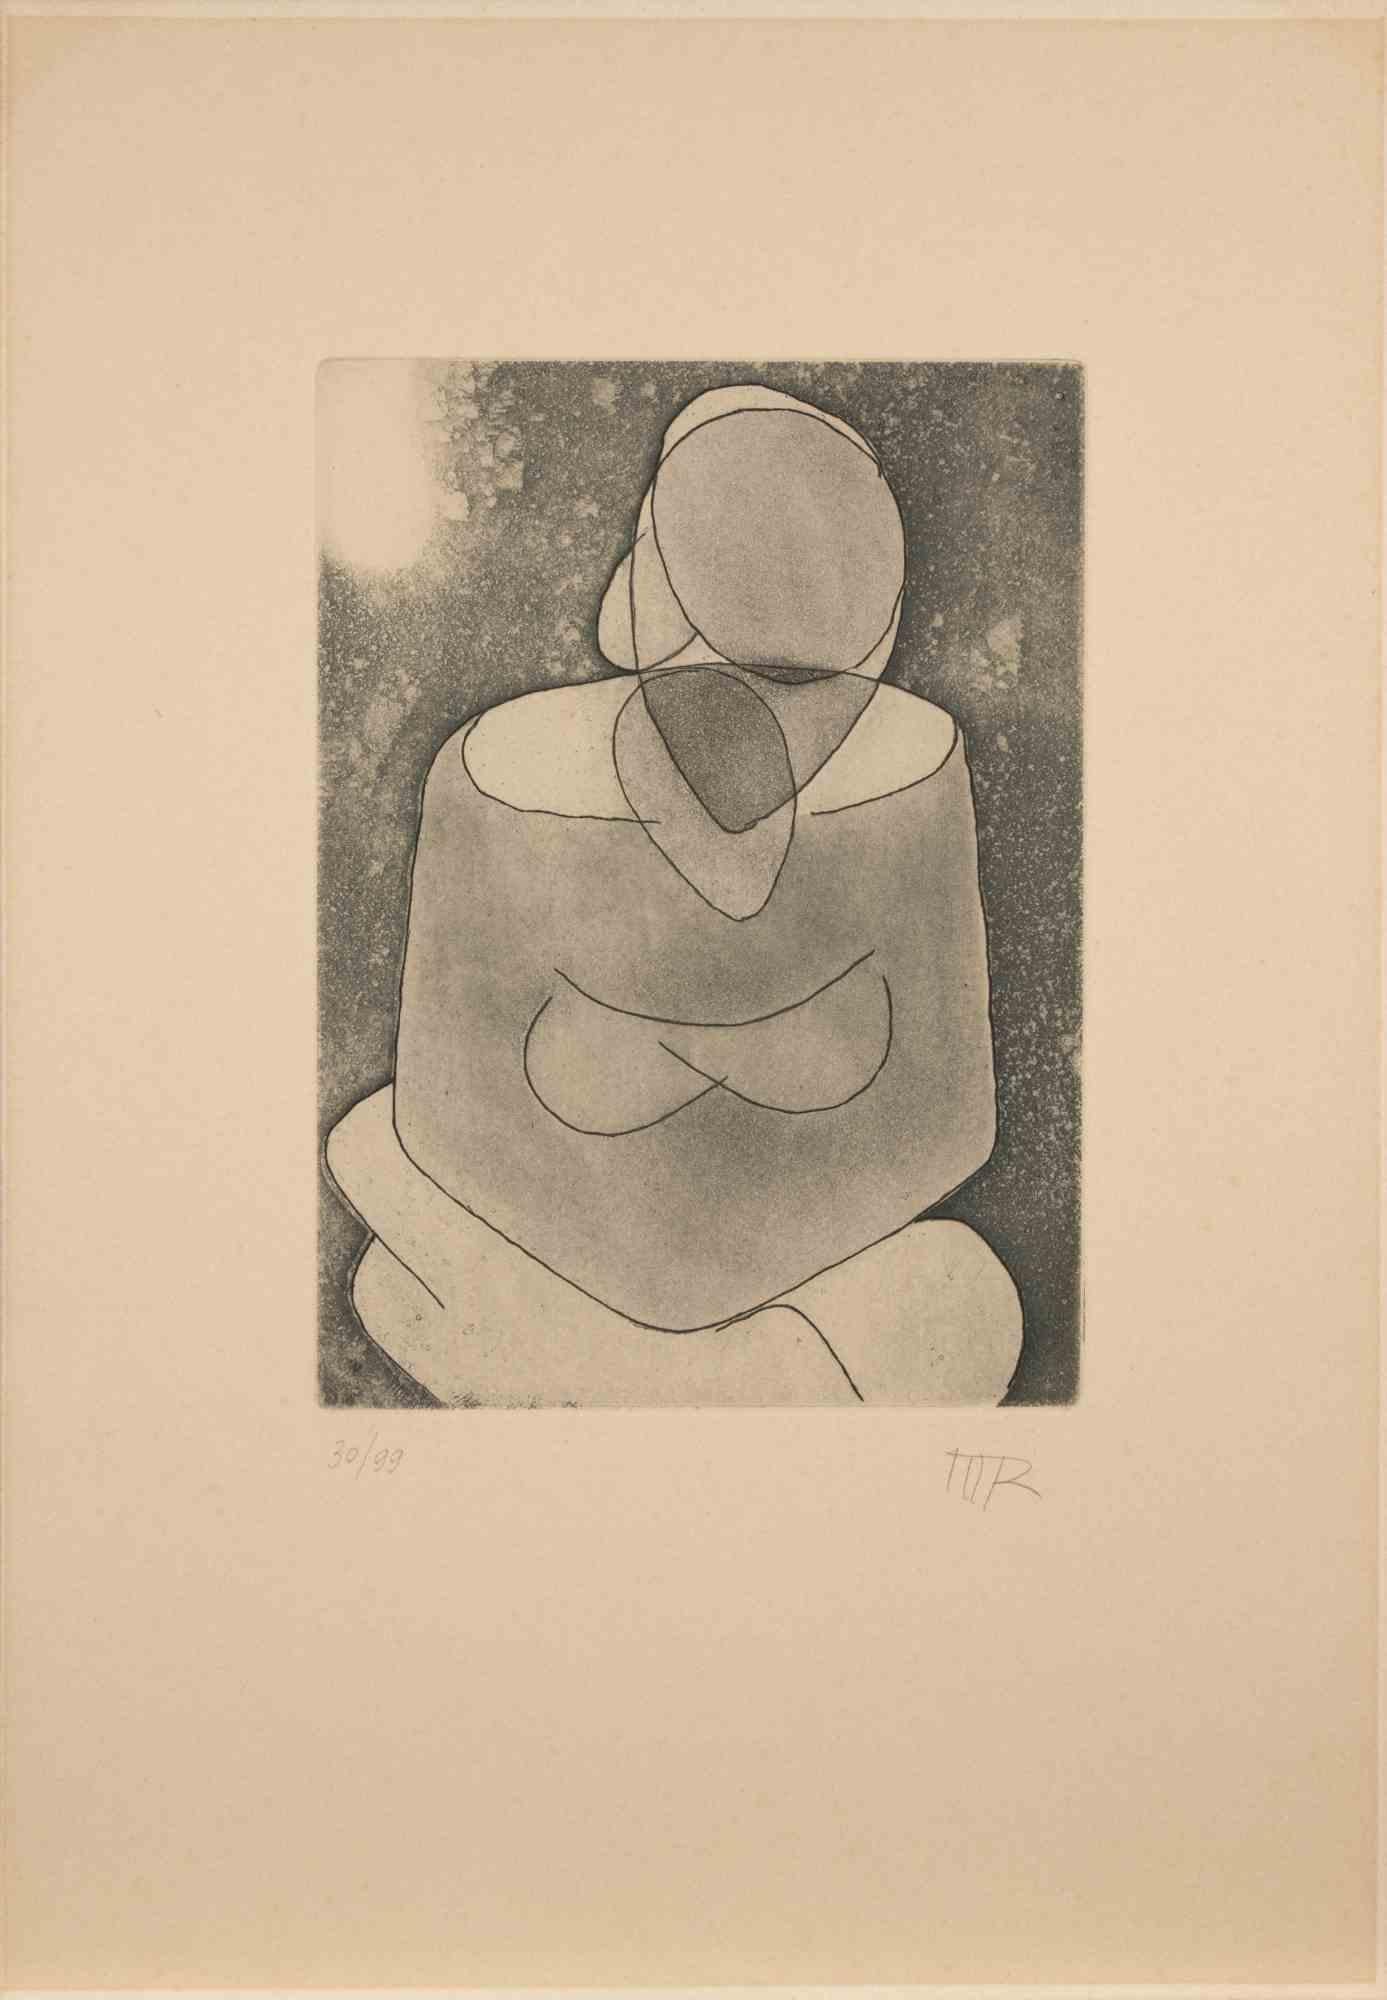 Woman is a contemporary artwork realized by Man Ray in 1968.

Black and white aquatint.

Initials of the artist on the lower margin.

Numbered in the lower left. Edition of 30/99.

Ref. Marconi. Vol. I n. 49